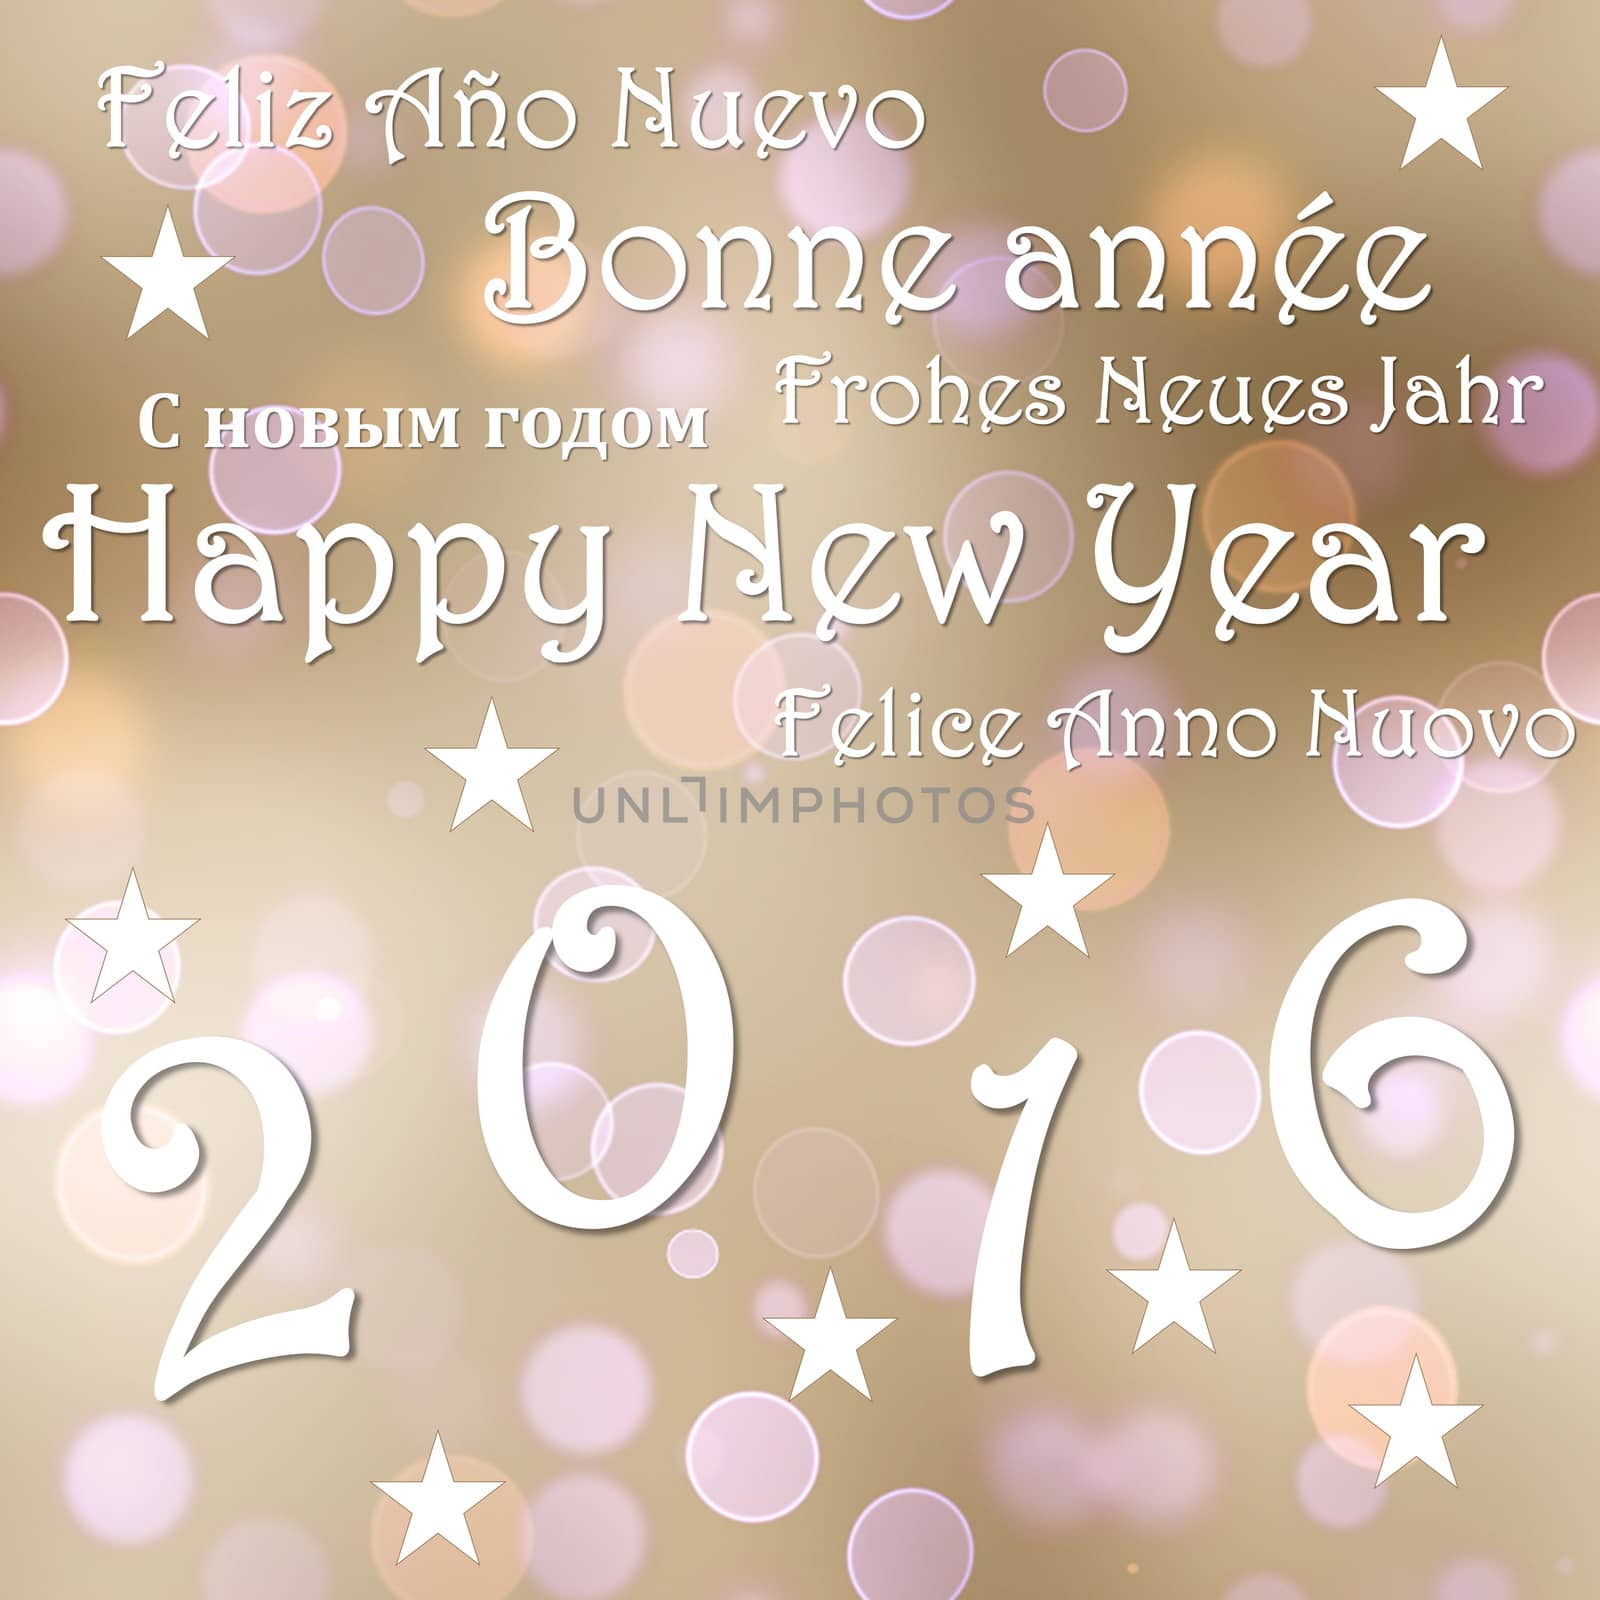 Happy new year 2016, in brownsky background with stars - 3D render